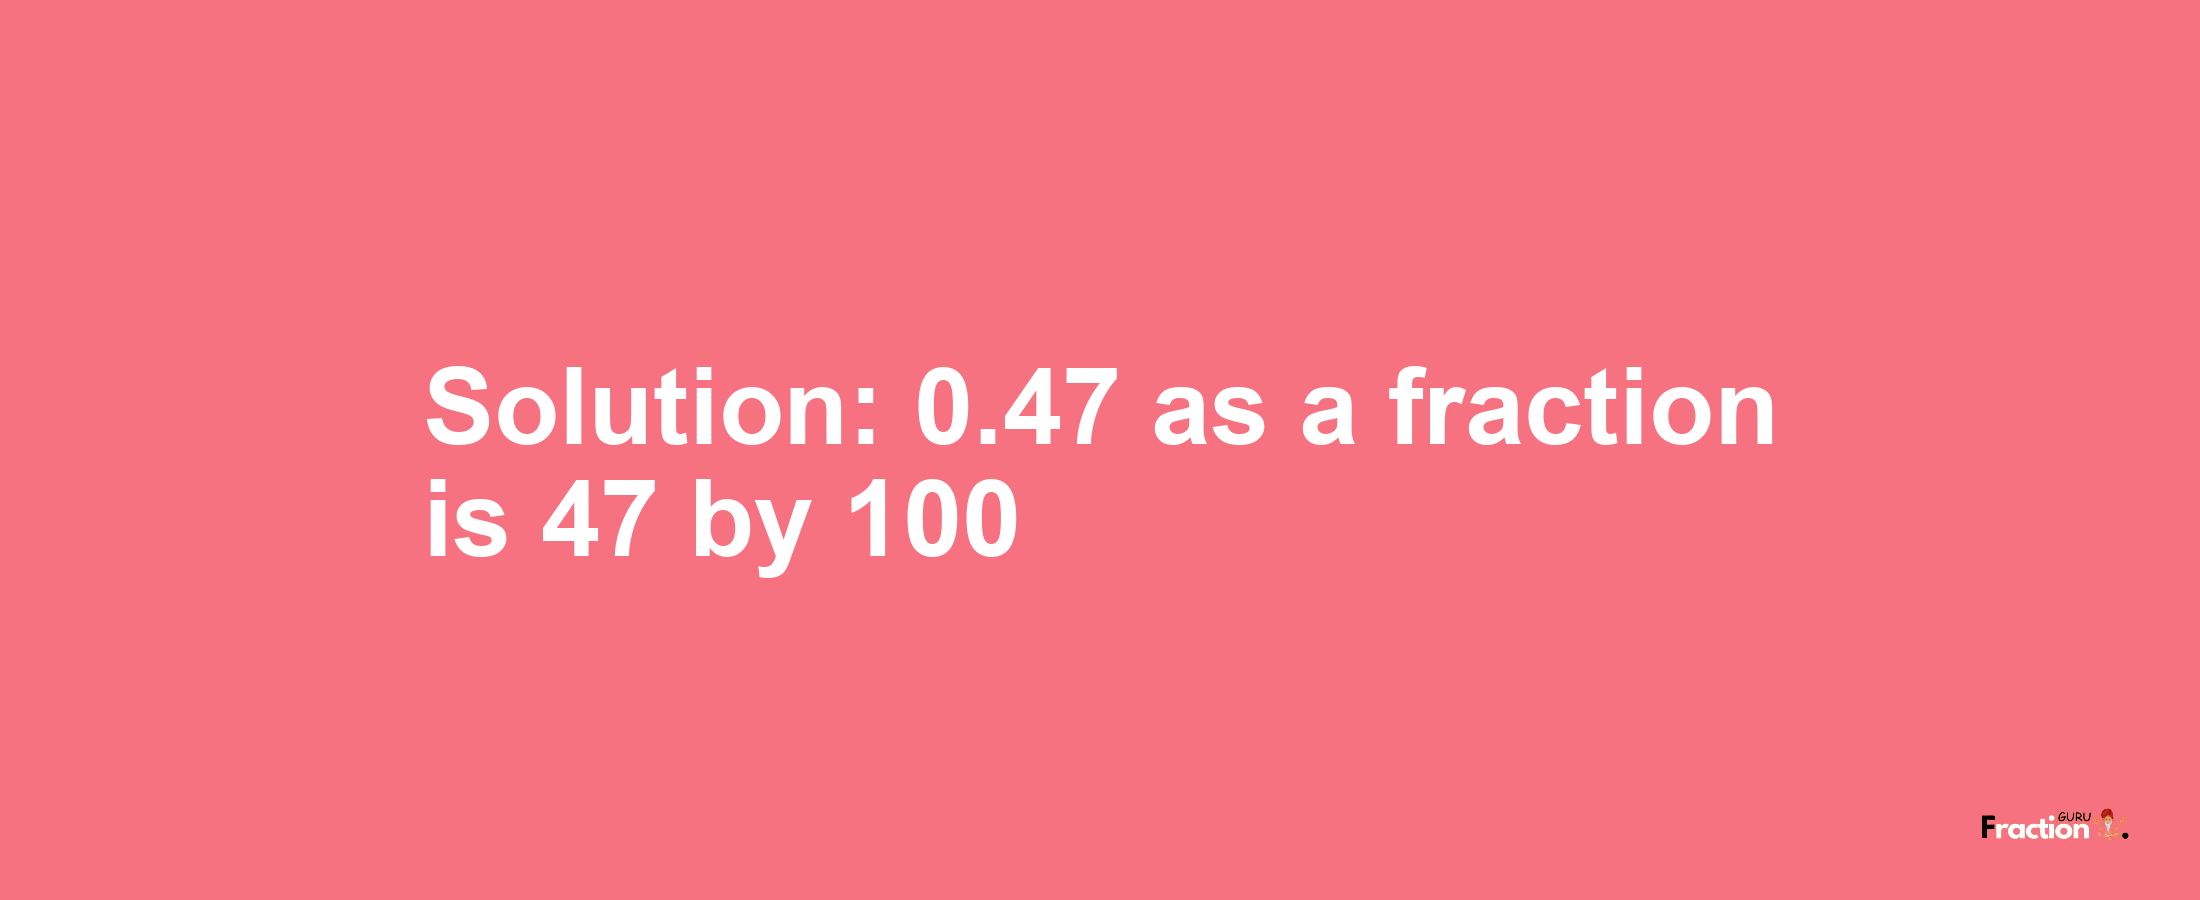 Solution:0.47 as a fraction is 47/100